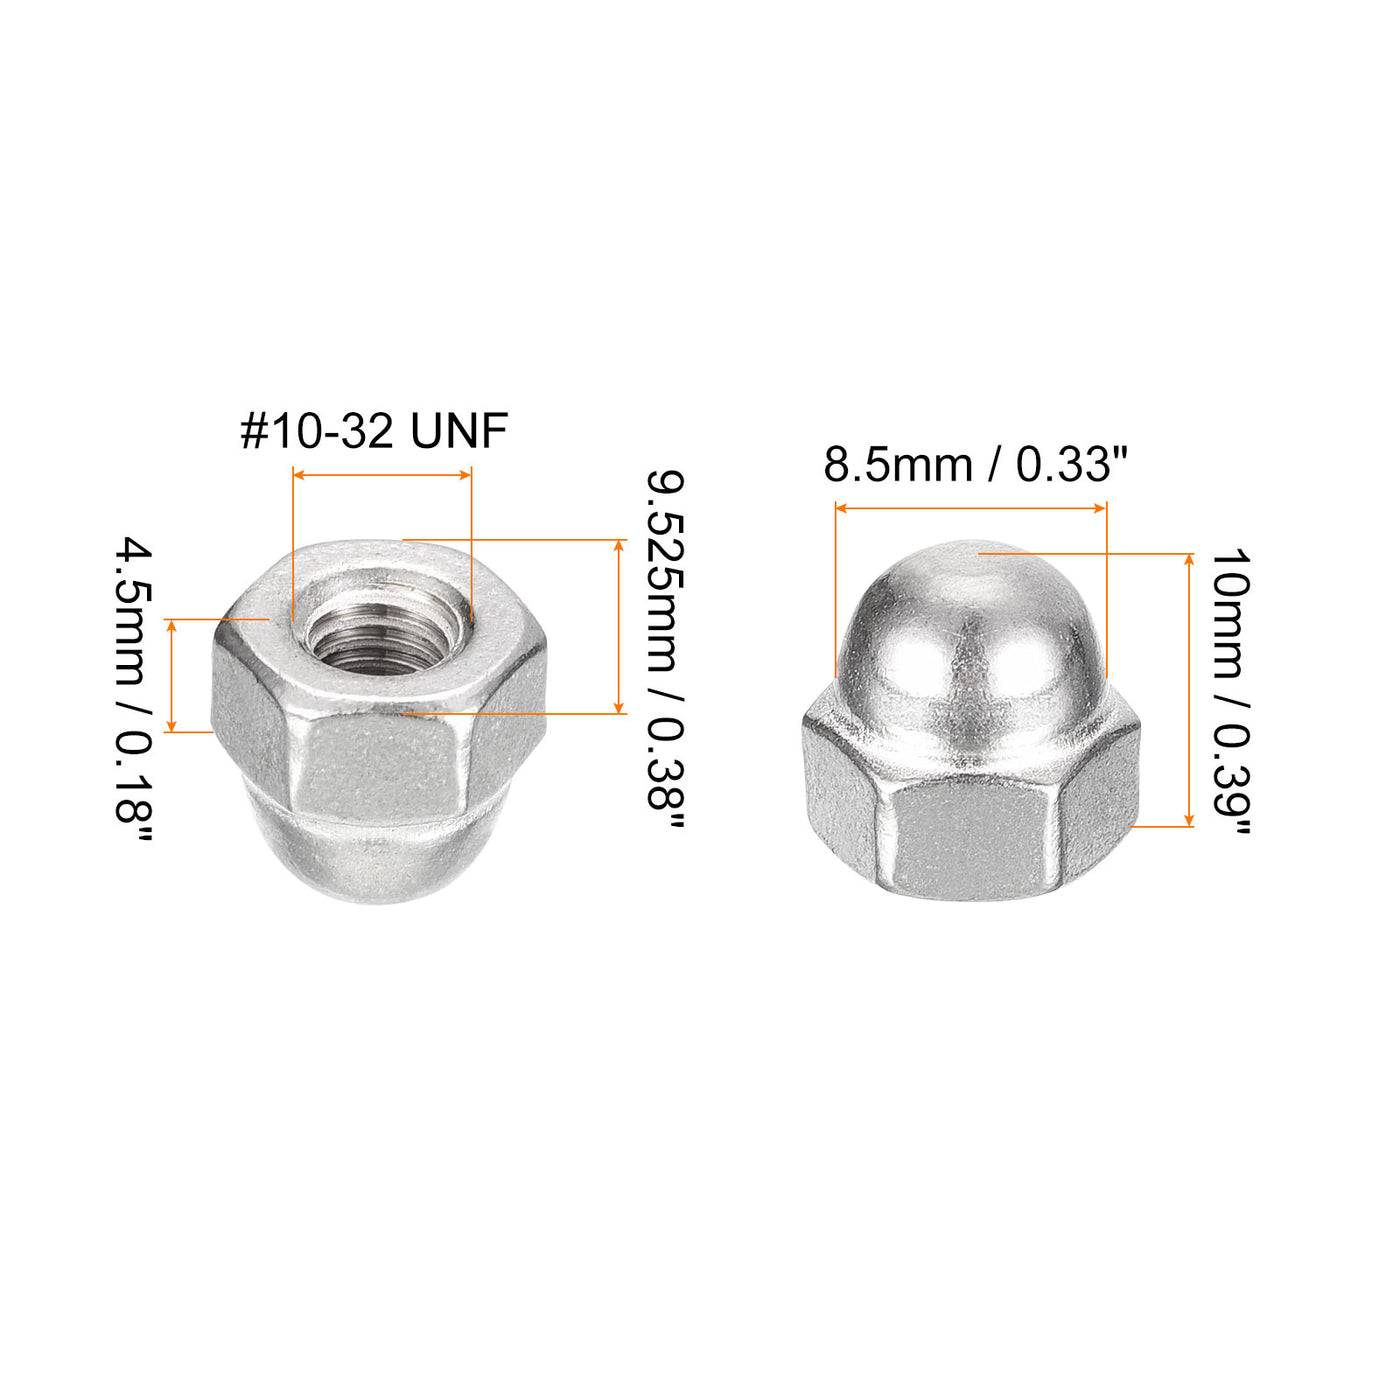 uxcell Uxcell #10-32 Acorn Cap Nuts,50pcs - 304 Stainless Steel Hardware Nuts, Acorn Hex Cap Dome Head Nuts for Fasteners (Silver)